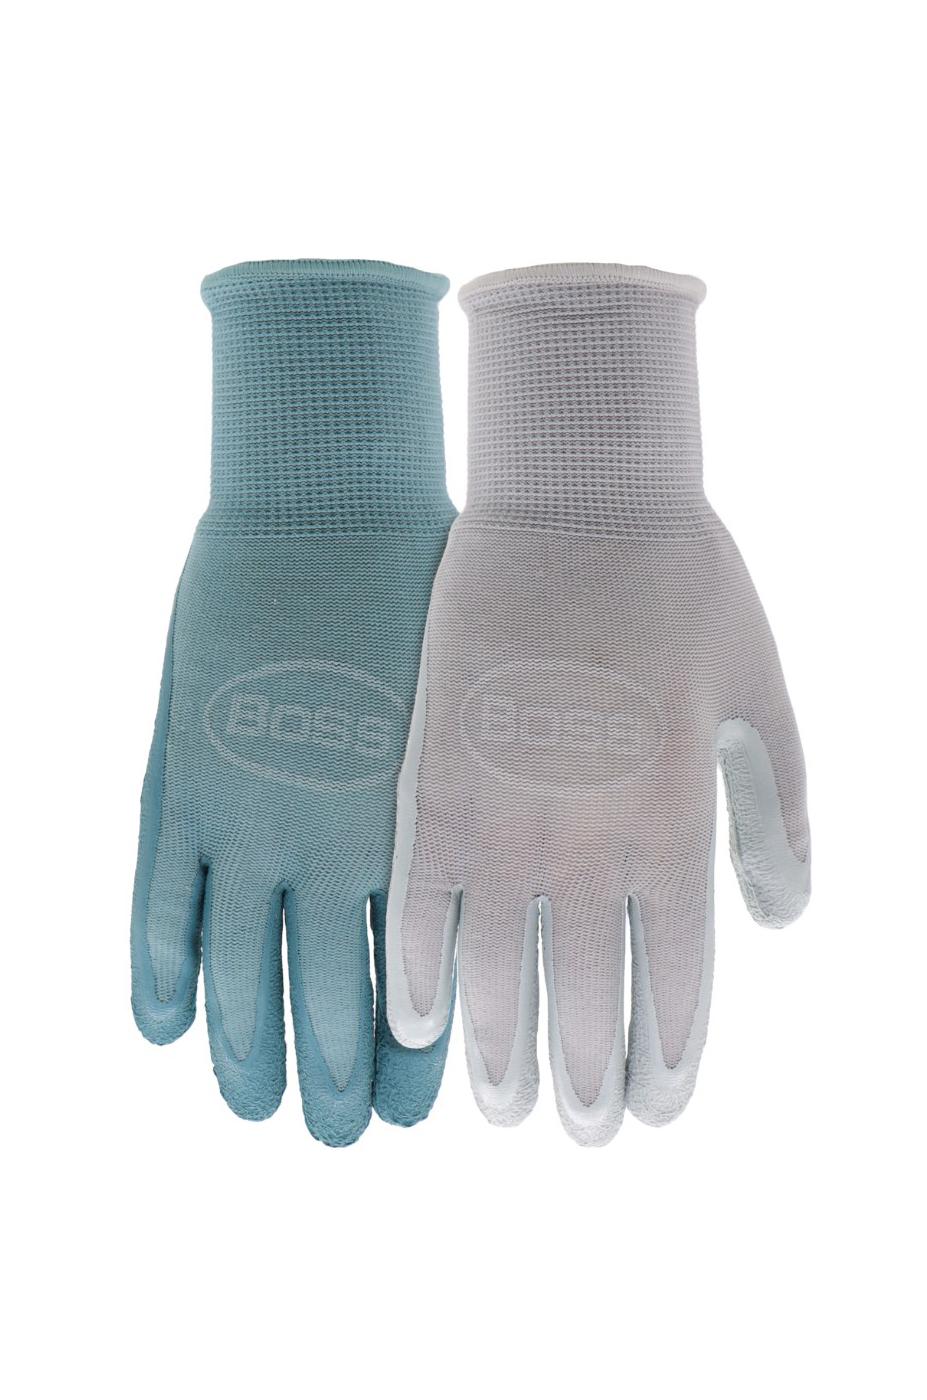 Boss 2 Women's Tactile Grip Latex Gloves; image 1 of 3